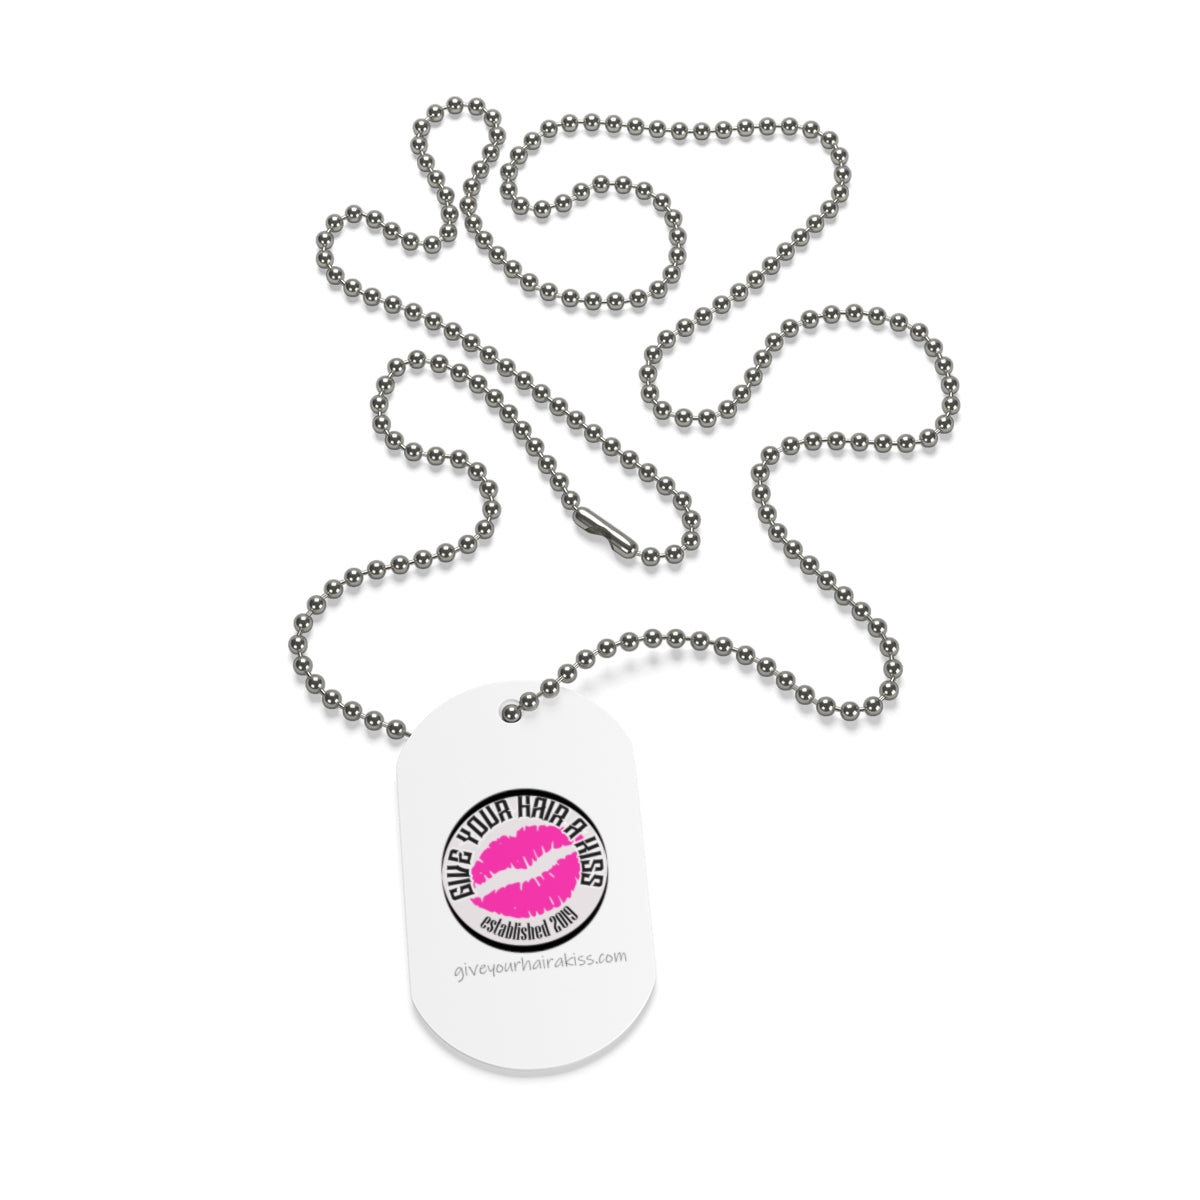 GIVE YOUR HAIR A KISS - Dog Tags - Give Your Hair a Kiss